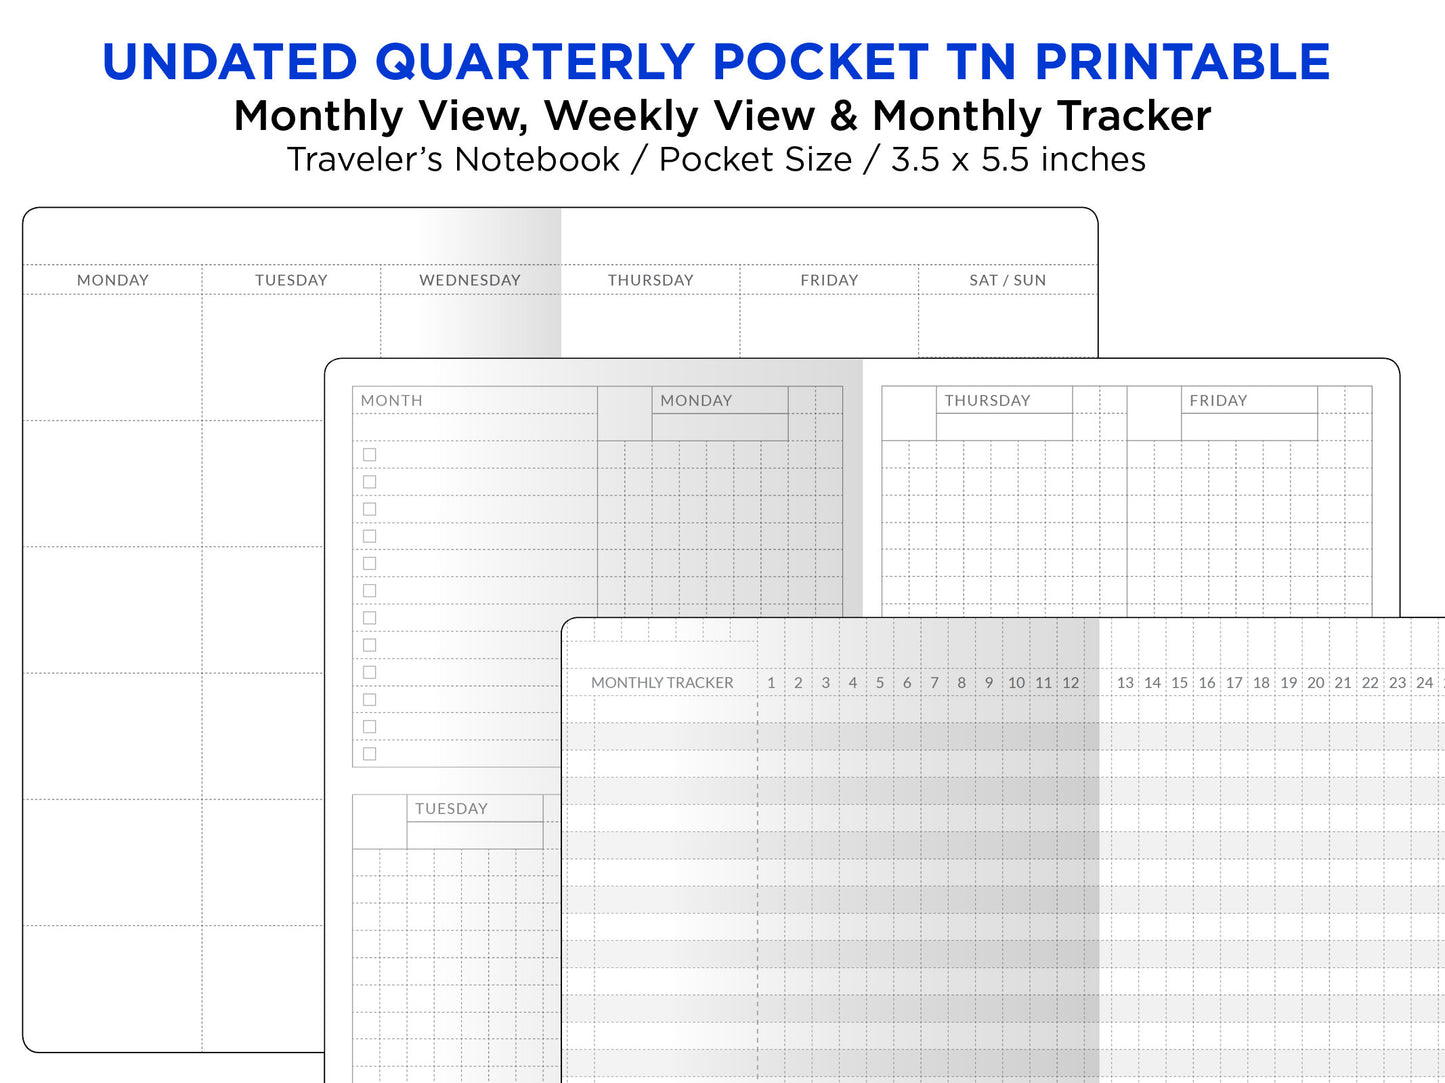 Quarterly POCKET Traveler's Notebook - Monthly View, Weekly View and Monthly Tracker PRINTABLE Undated Insert